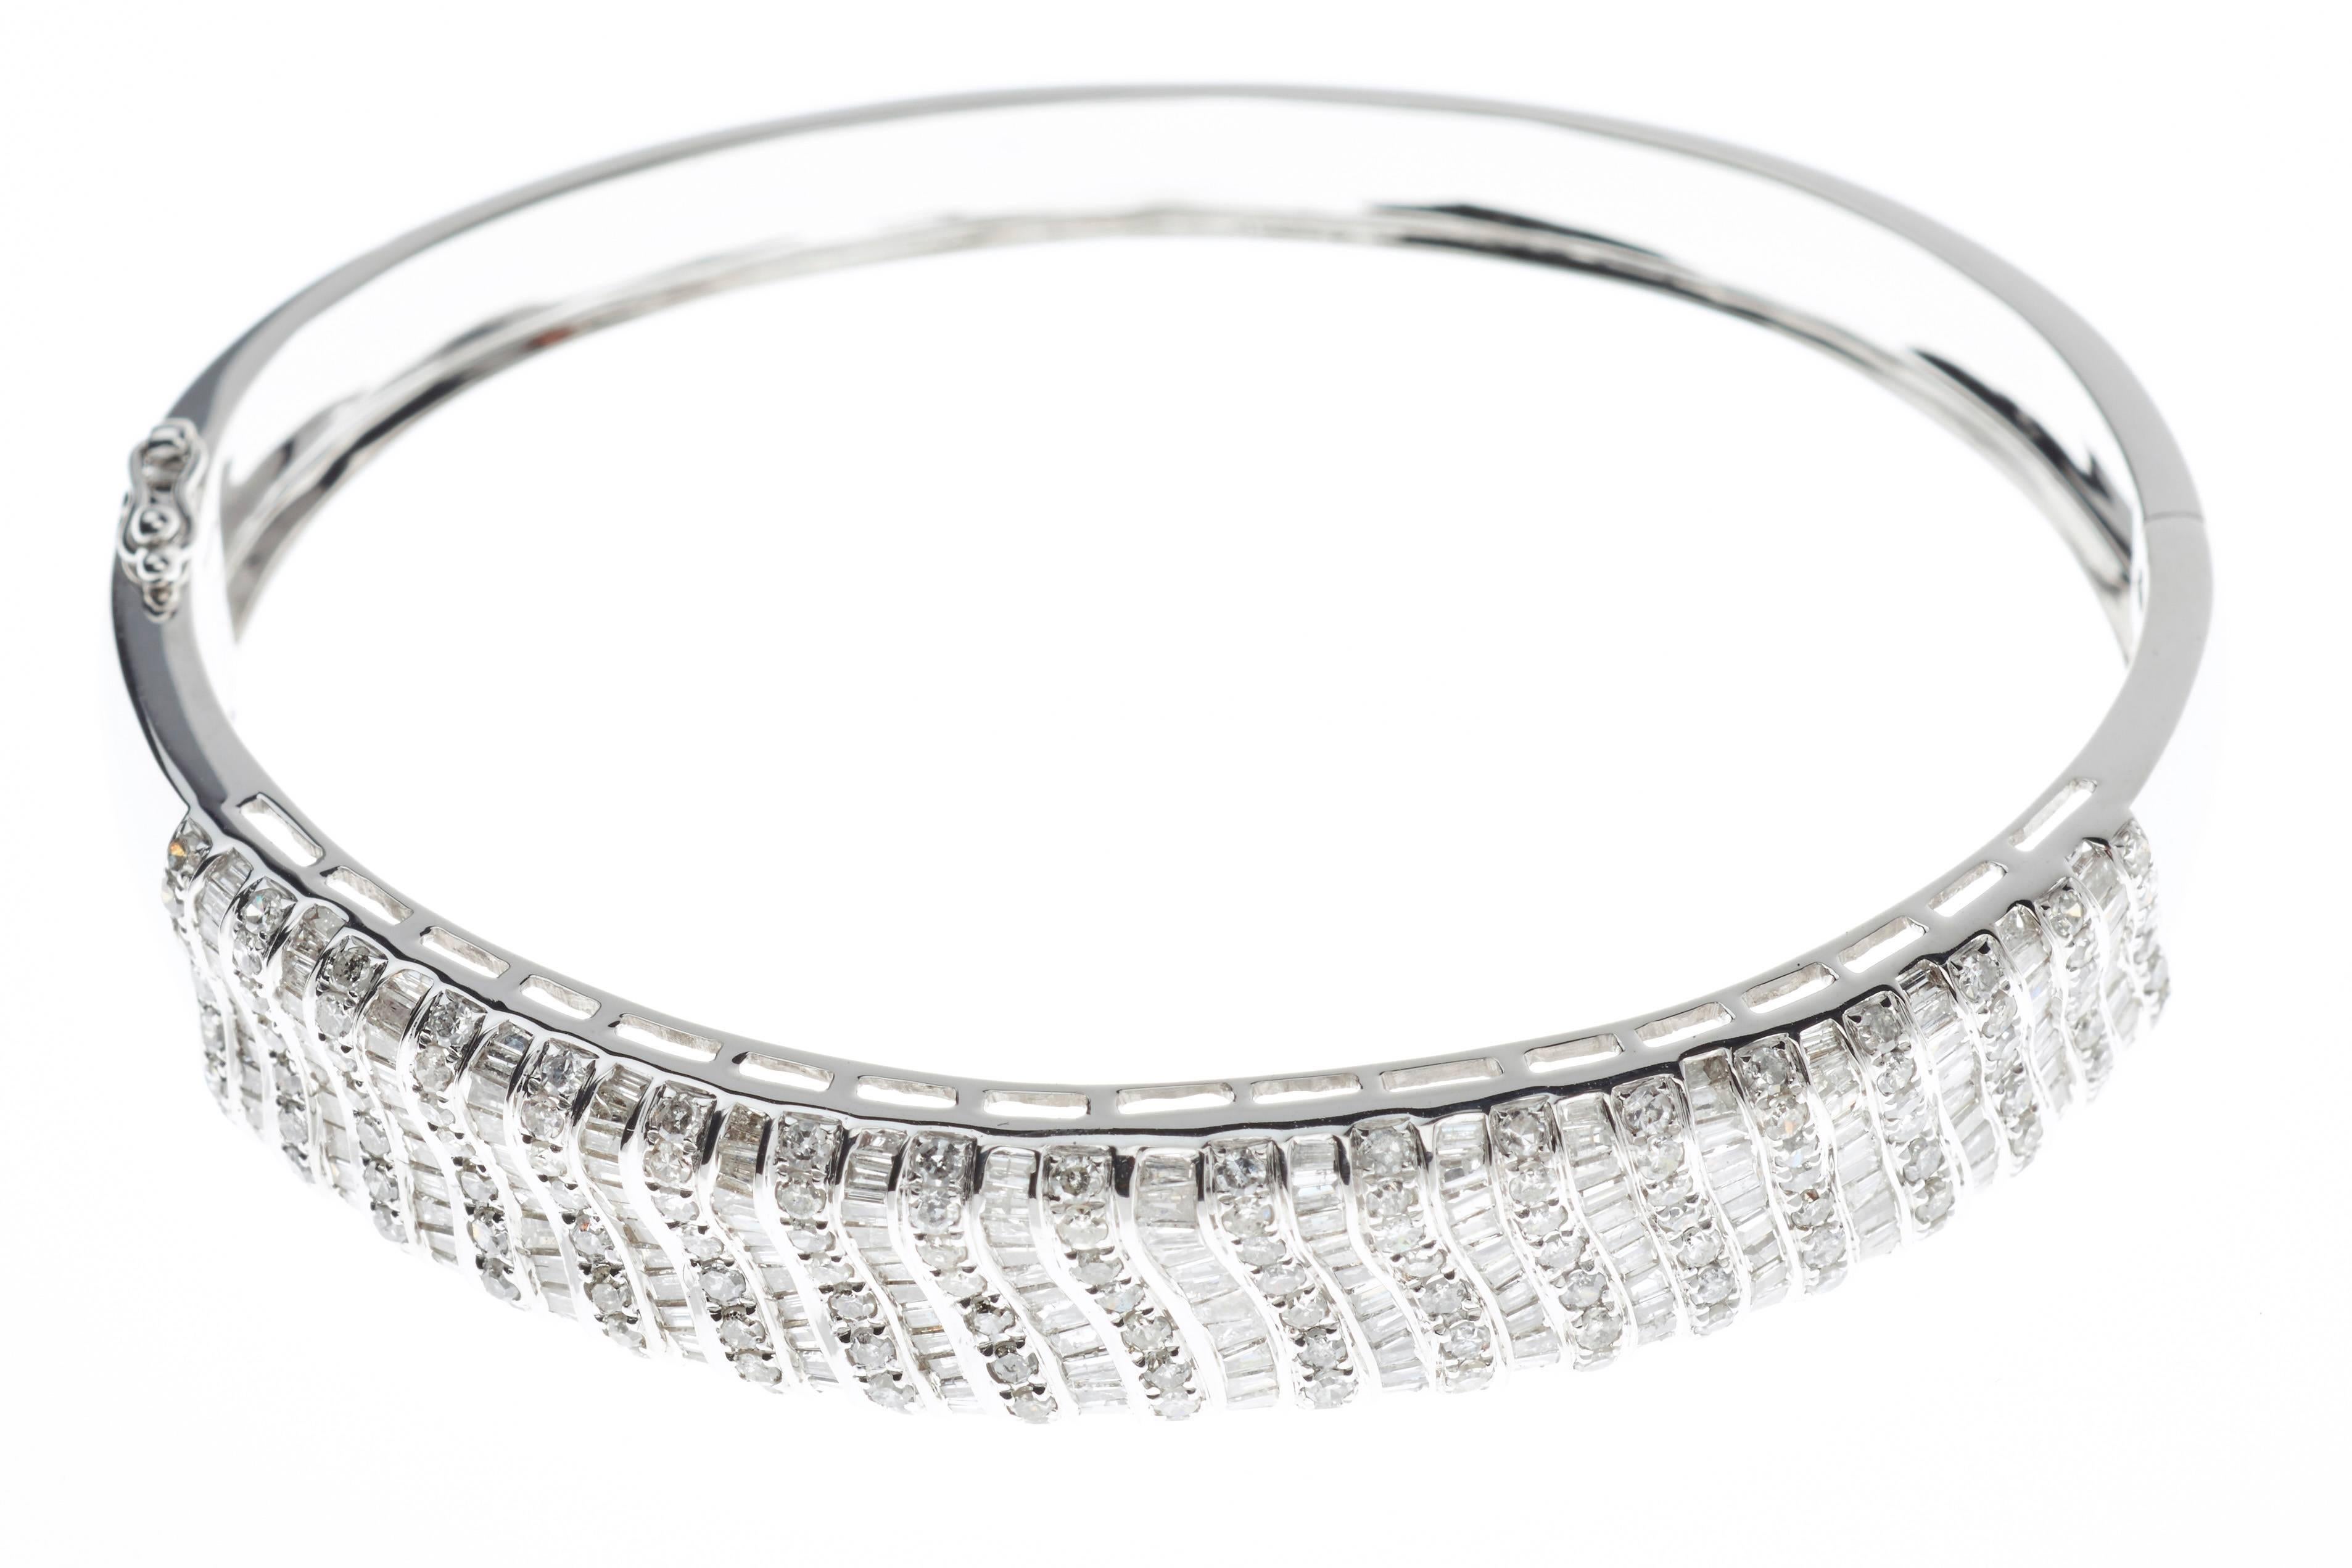 A fancy diamond bangle; featuring a combination of 142 round brilliant cut diamonds (total 1.74 ct) and 208 tapered diamonds (total 2.64 ct) set in 18 carat white gold (total 26.21 grams) 

350 Total Diamonds 4.38ct
18ct White Gold
Free Express